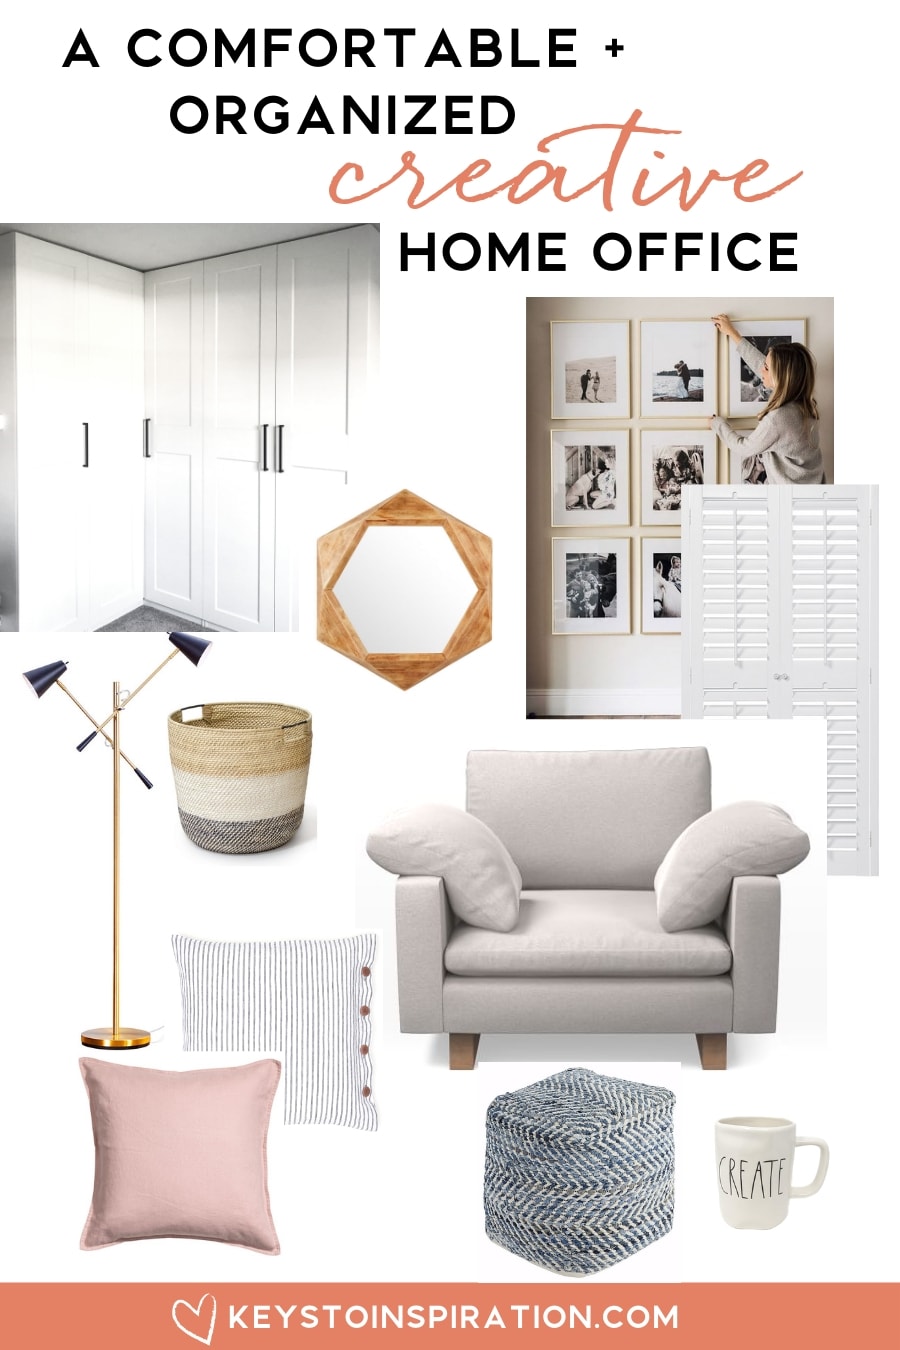 Planning a Comfortable and Organized Creative Home Office